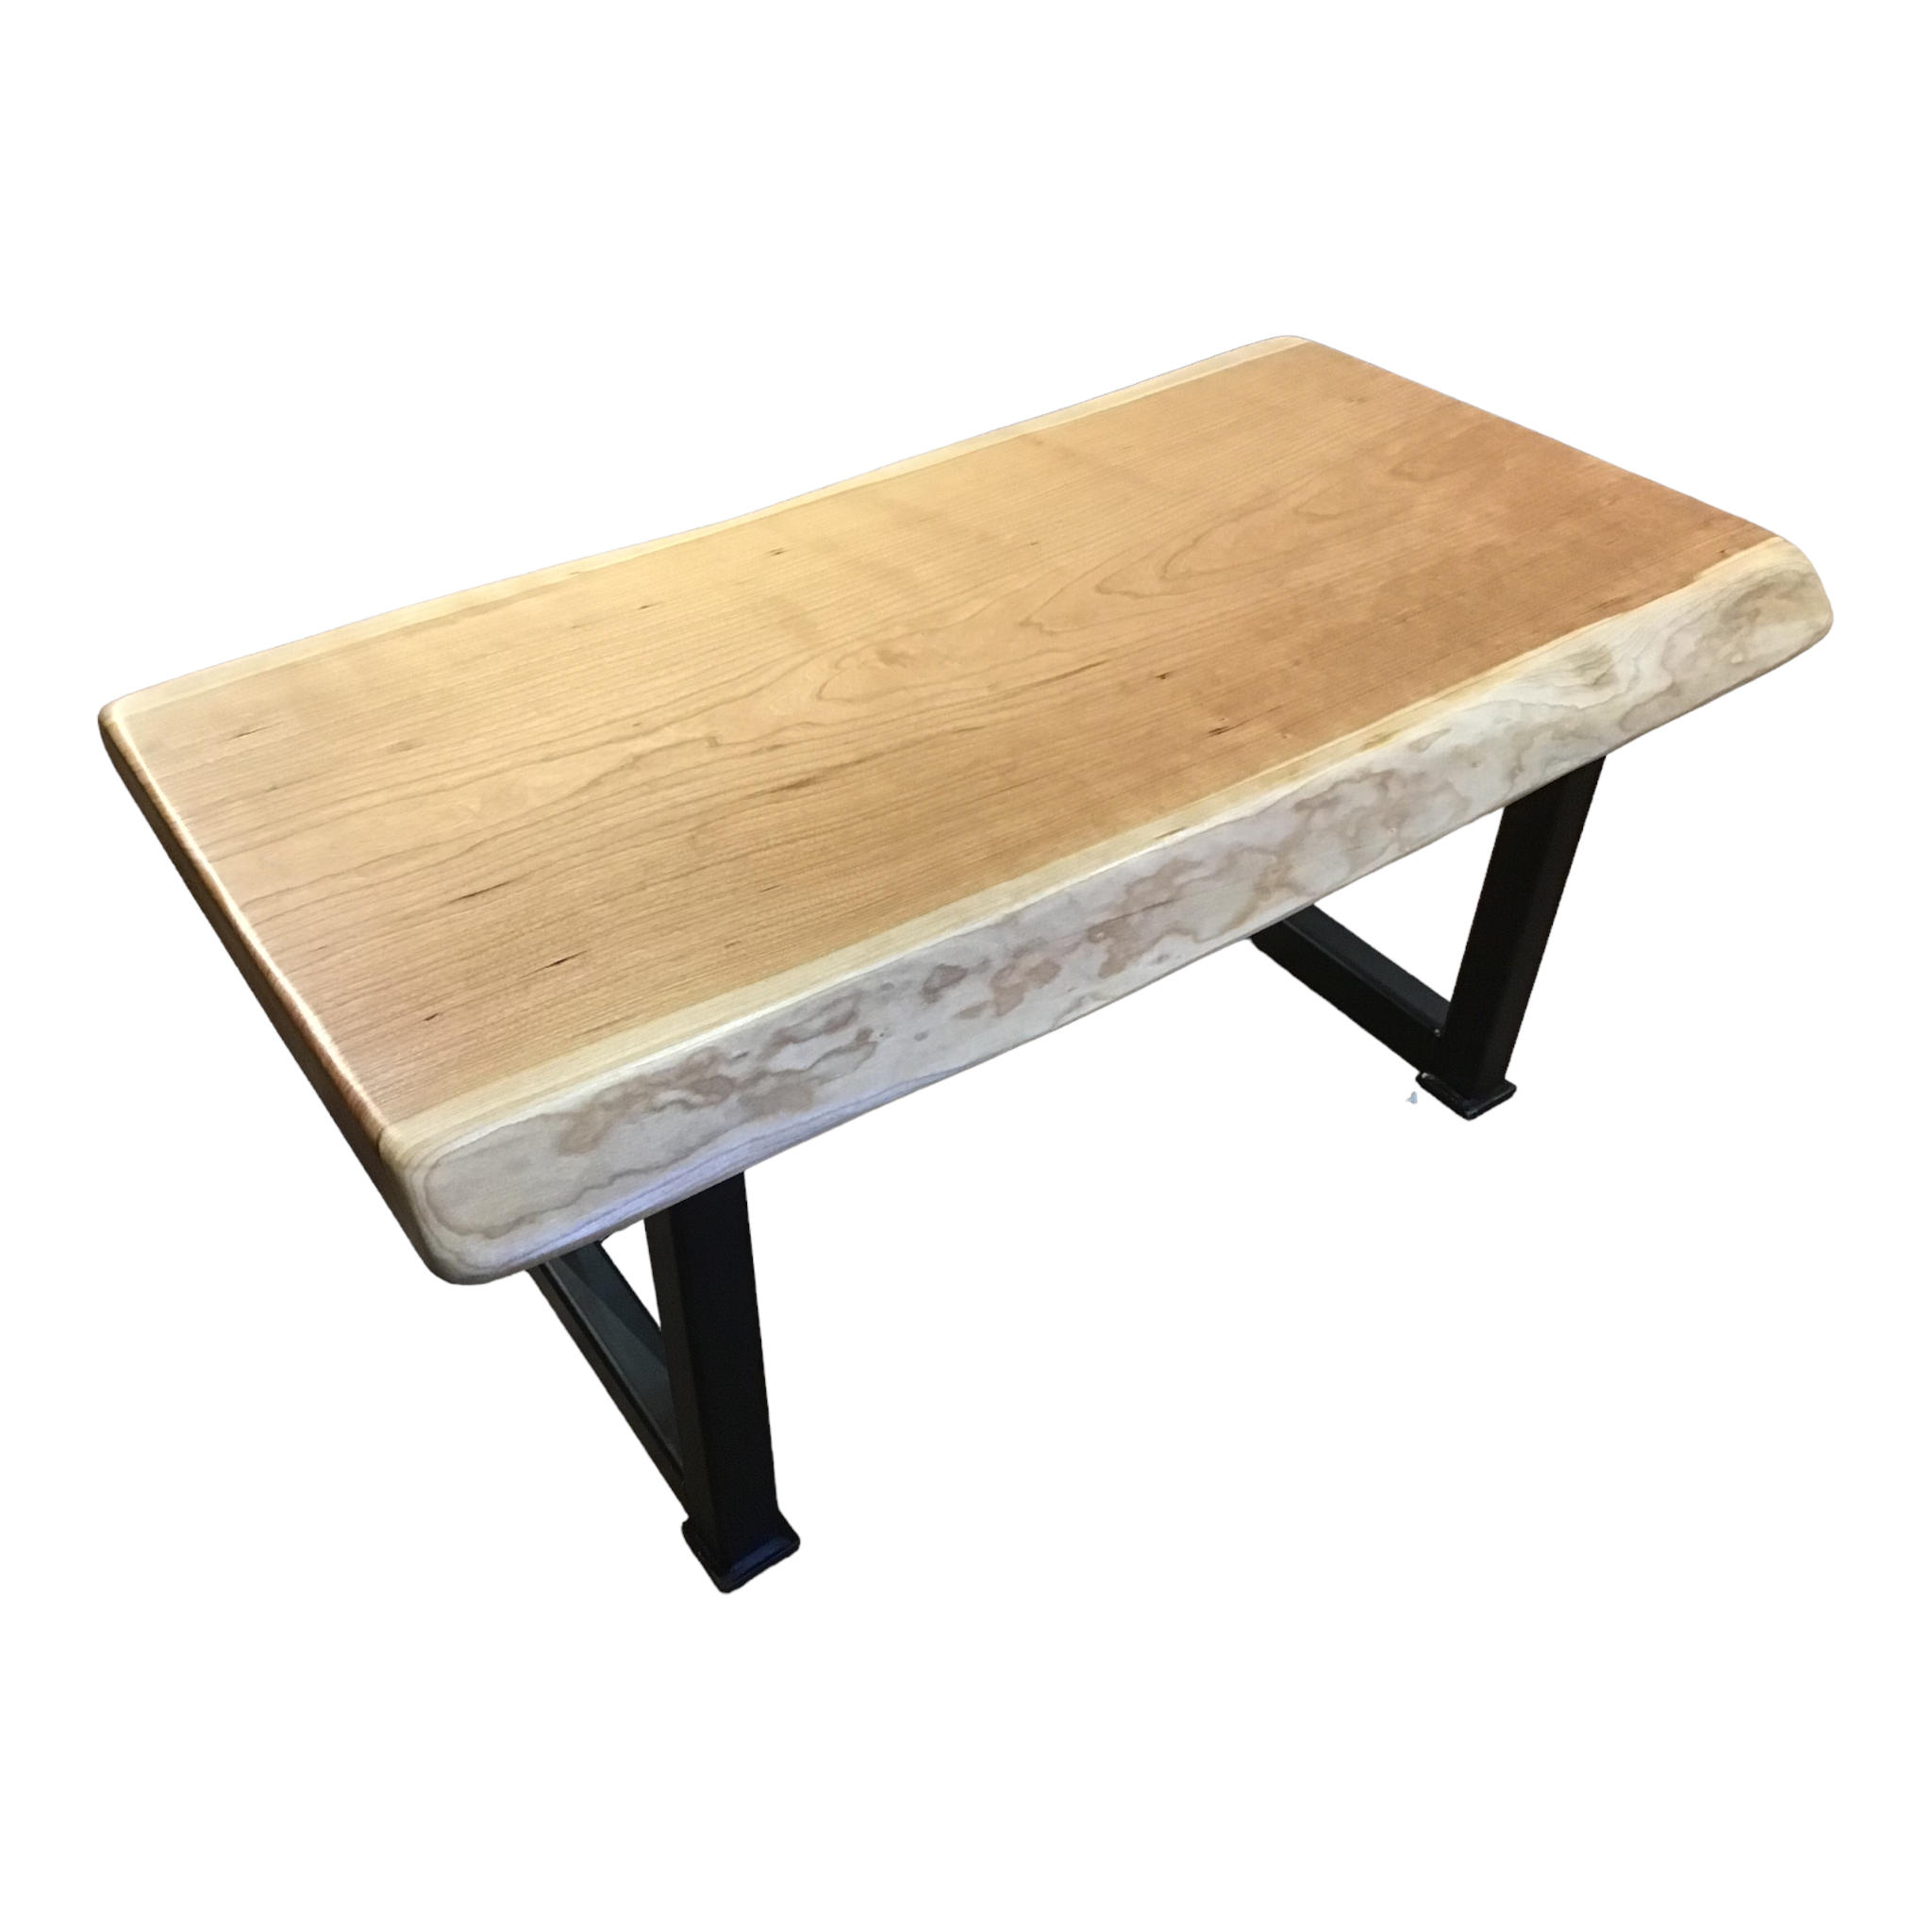 Simple Cherry Coffee Table/Bench